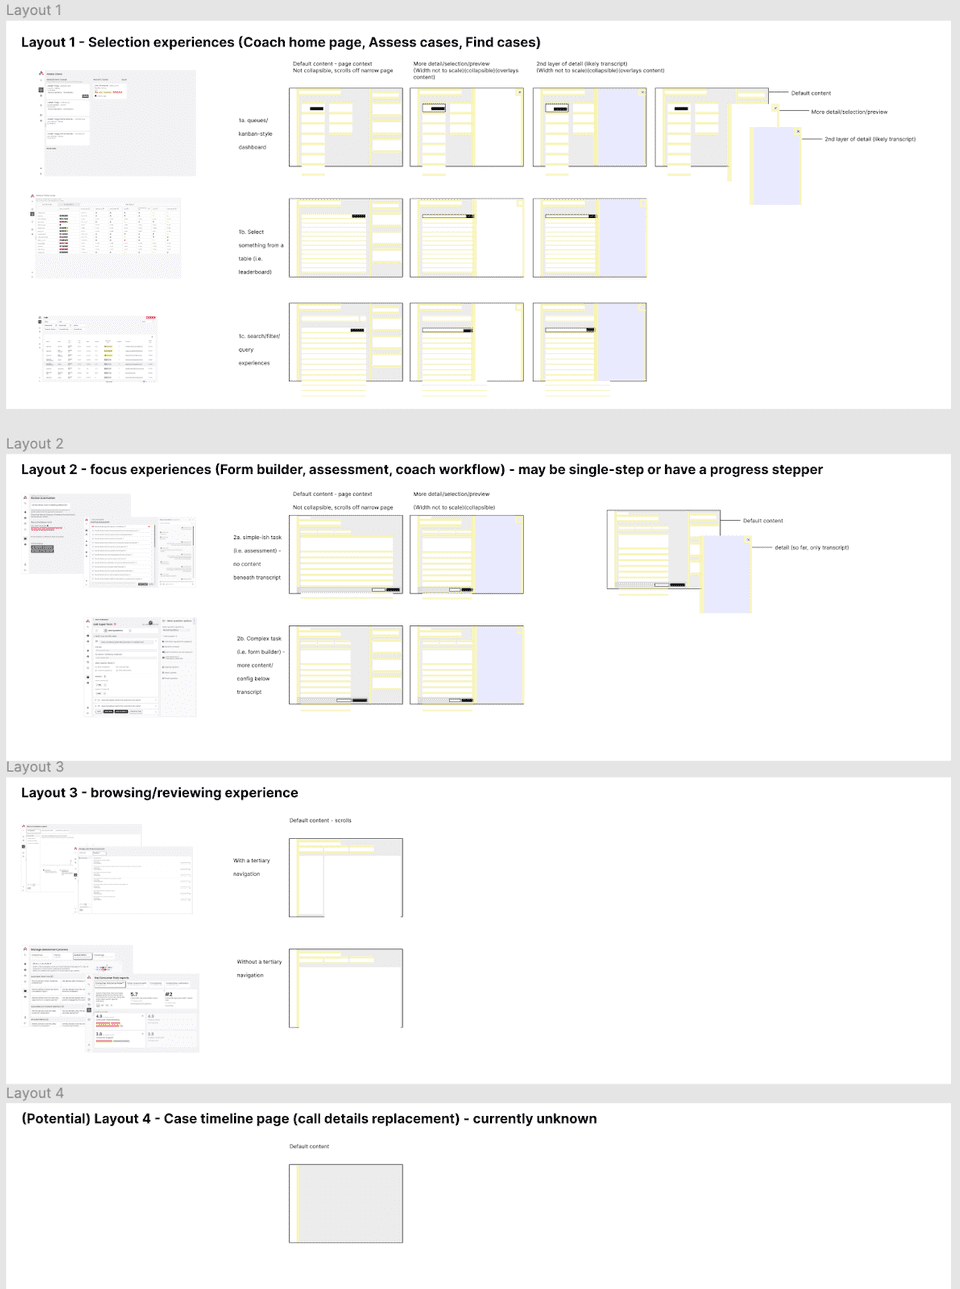 An audit we created of the existing layout patterns